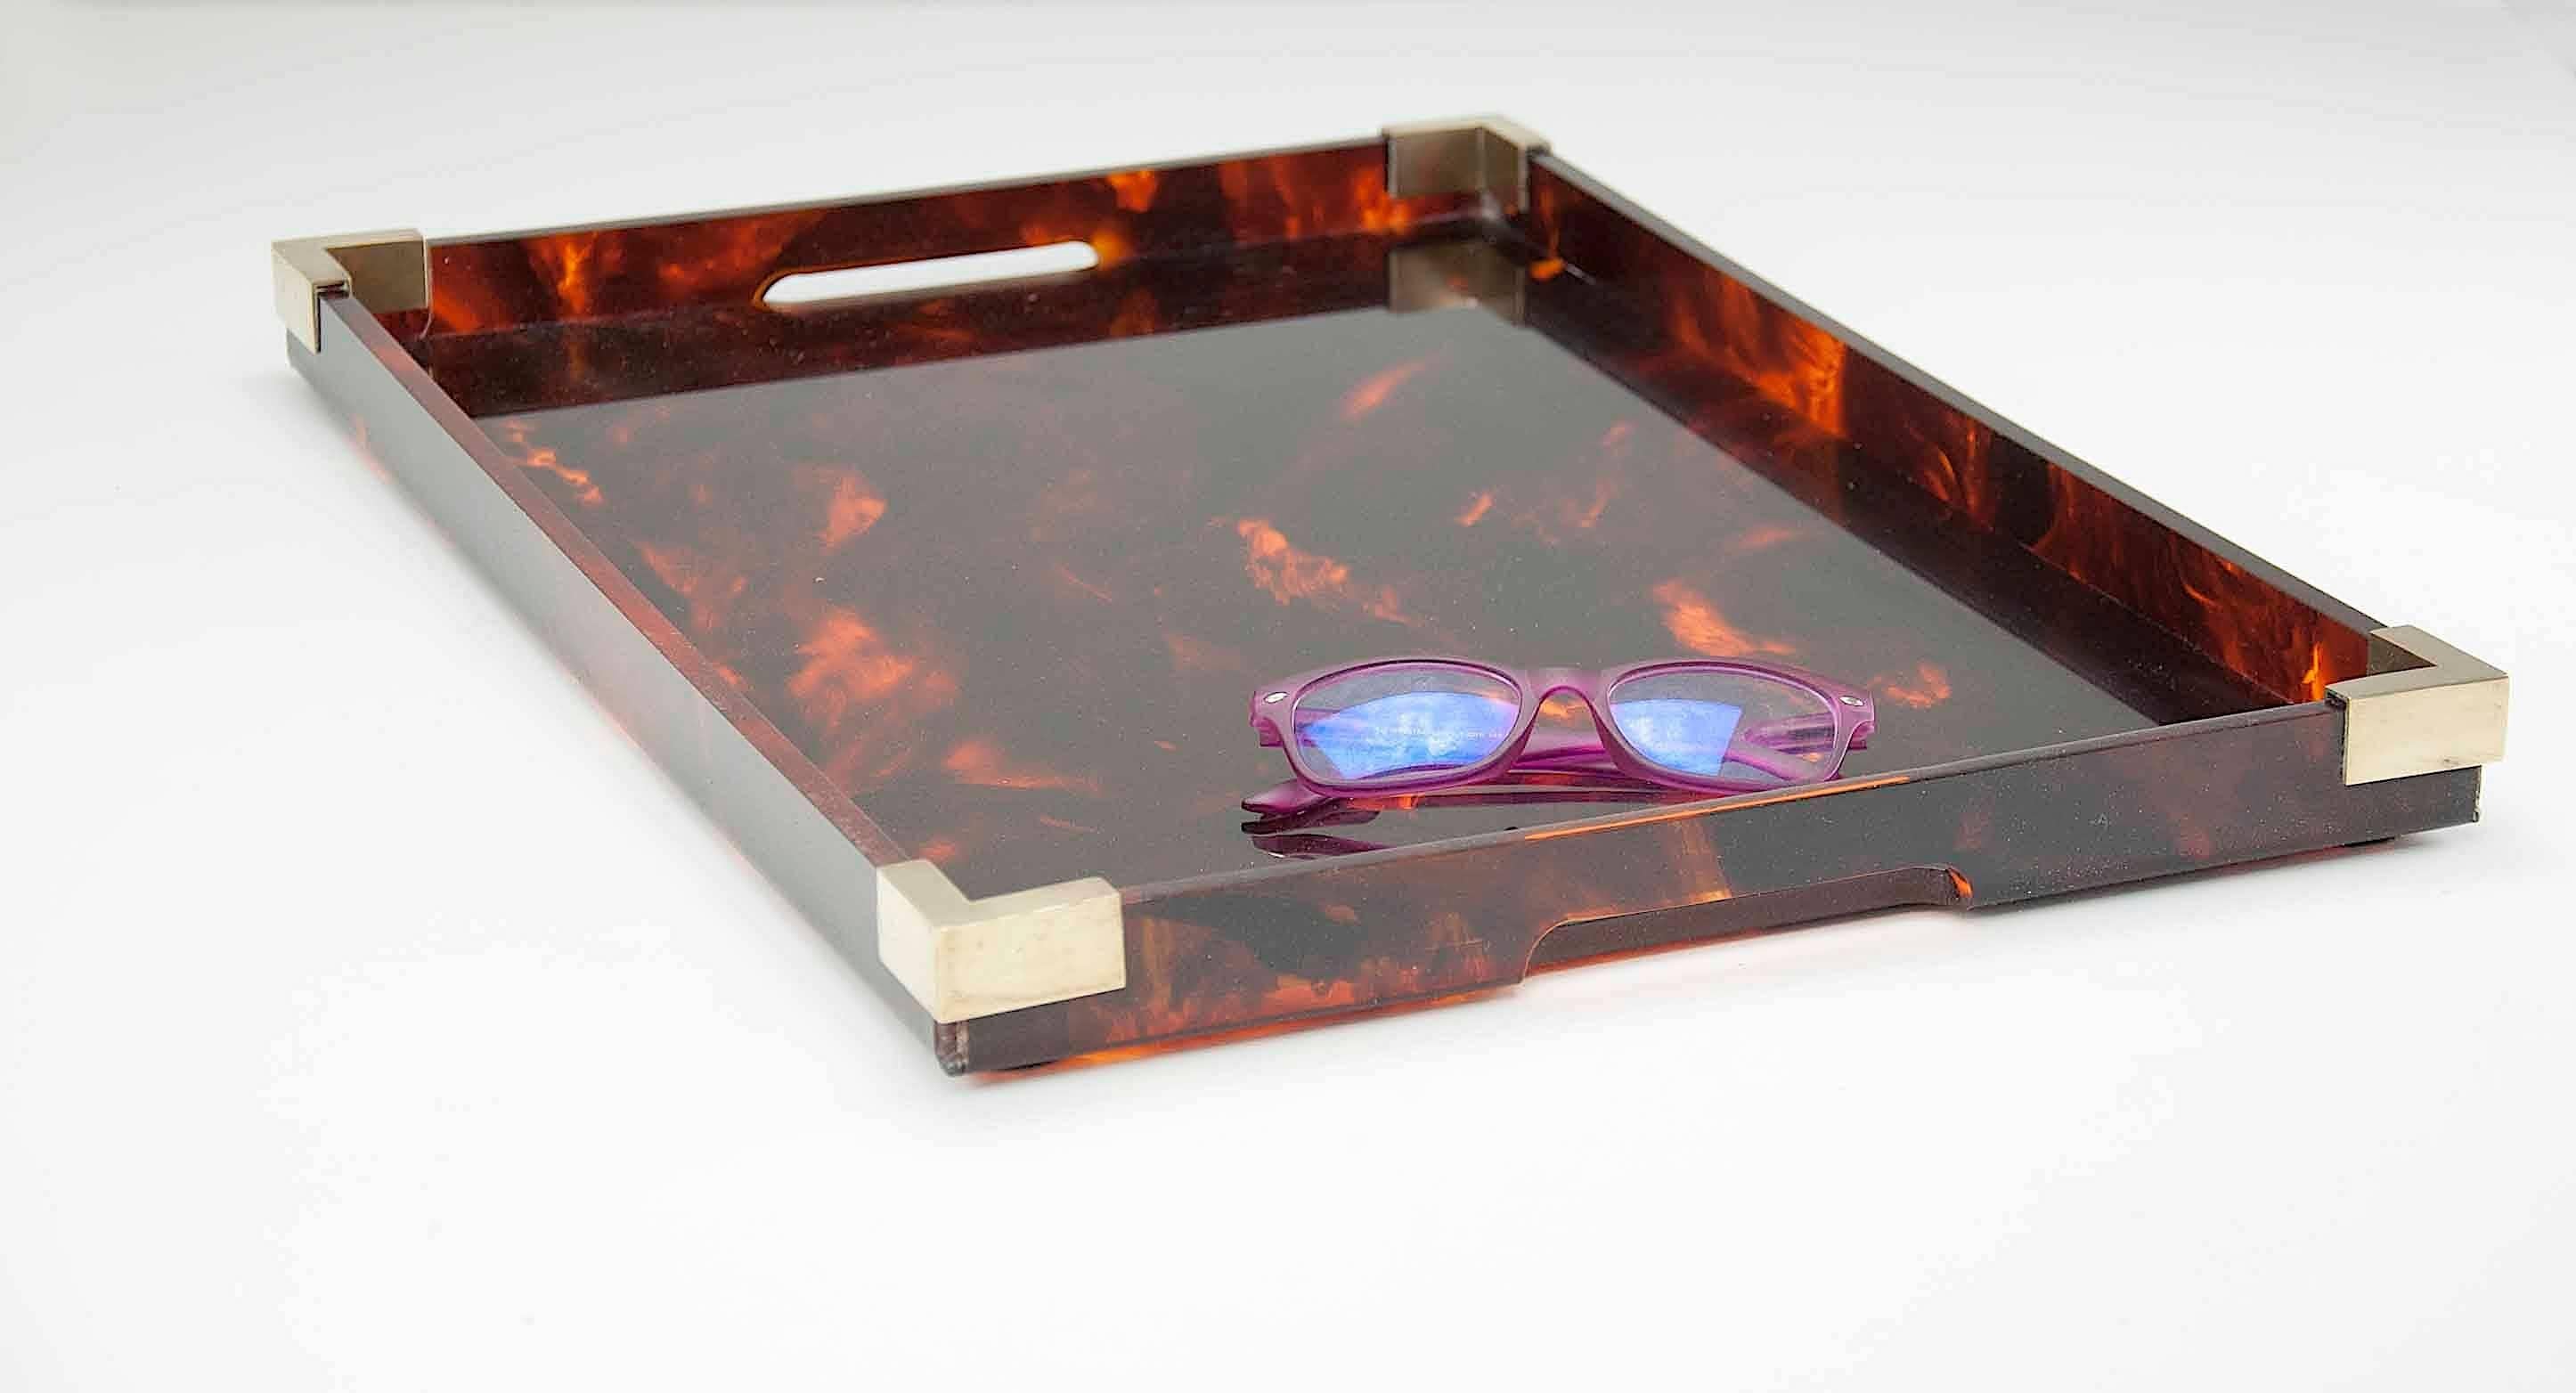 A Mid-Century Modernist serving tray platter attributed to Christian Dior Home Collection, circa 1960s. Large rectangular shape with Lucite in faux tortoise shell pattern and color and brass border.